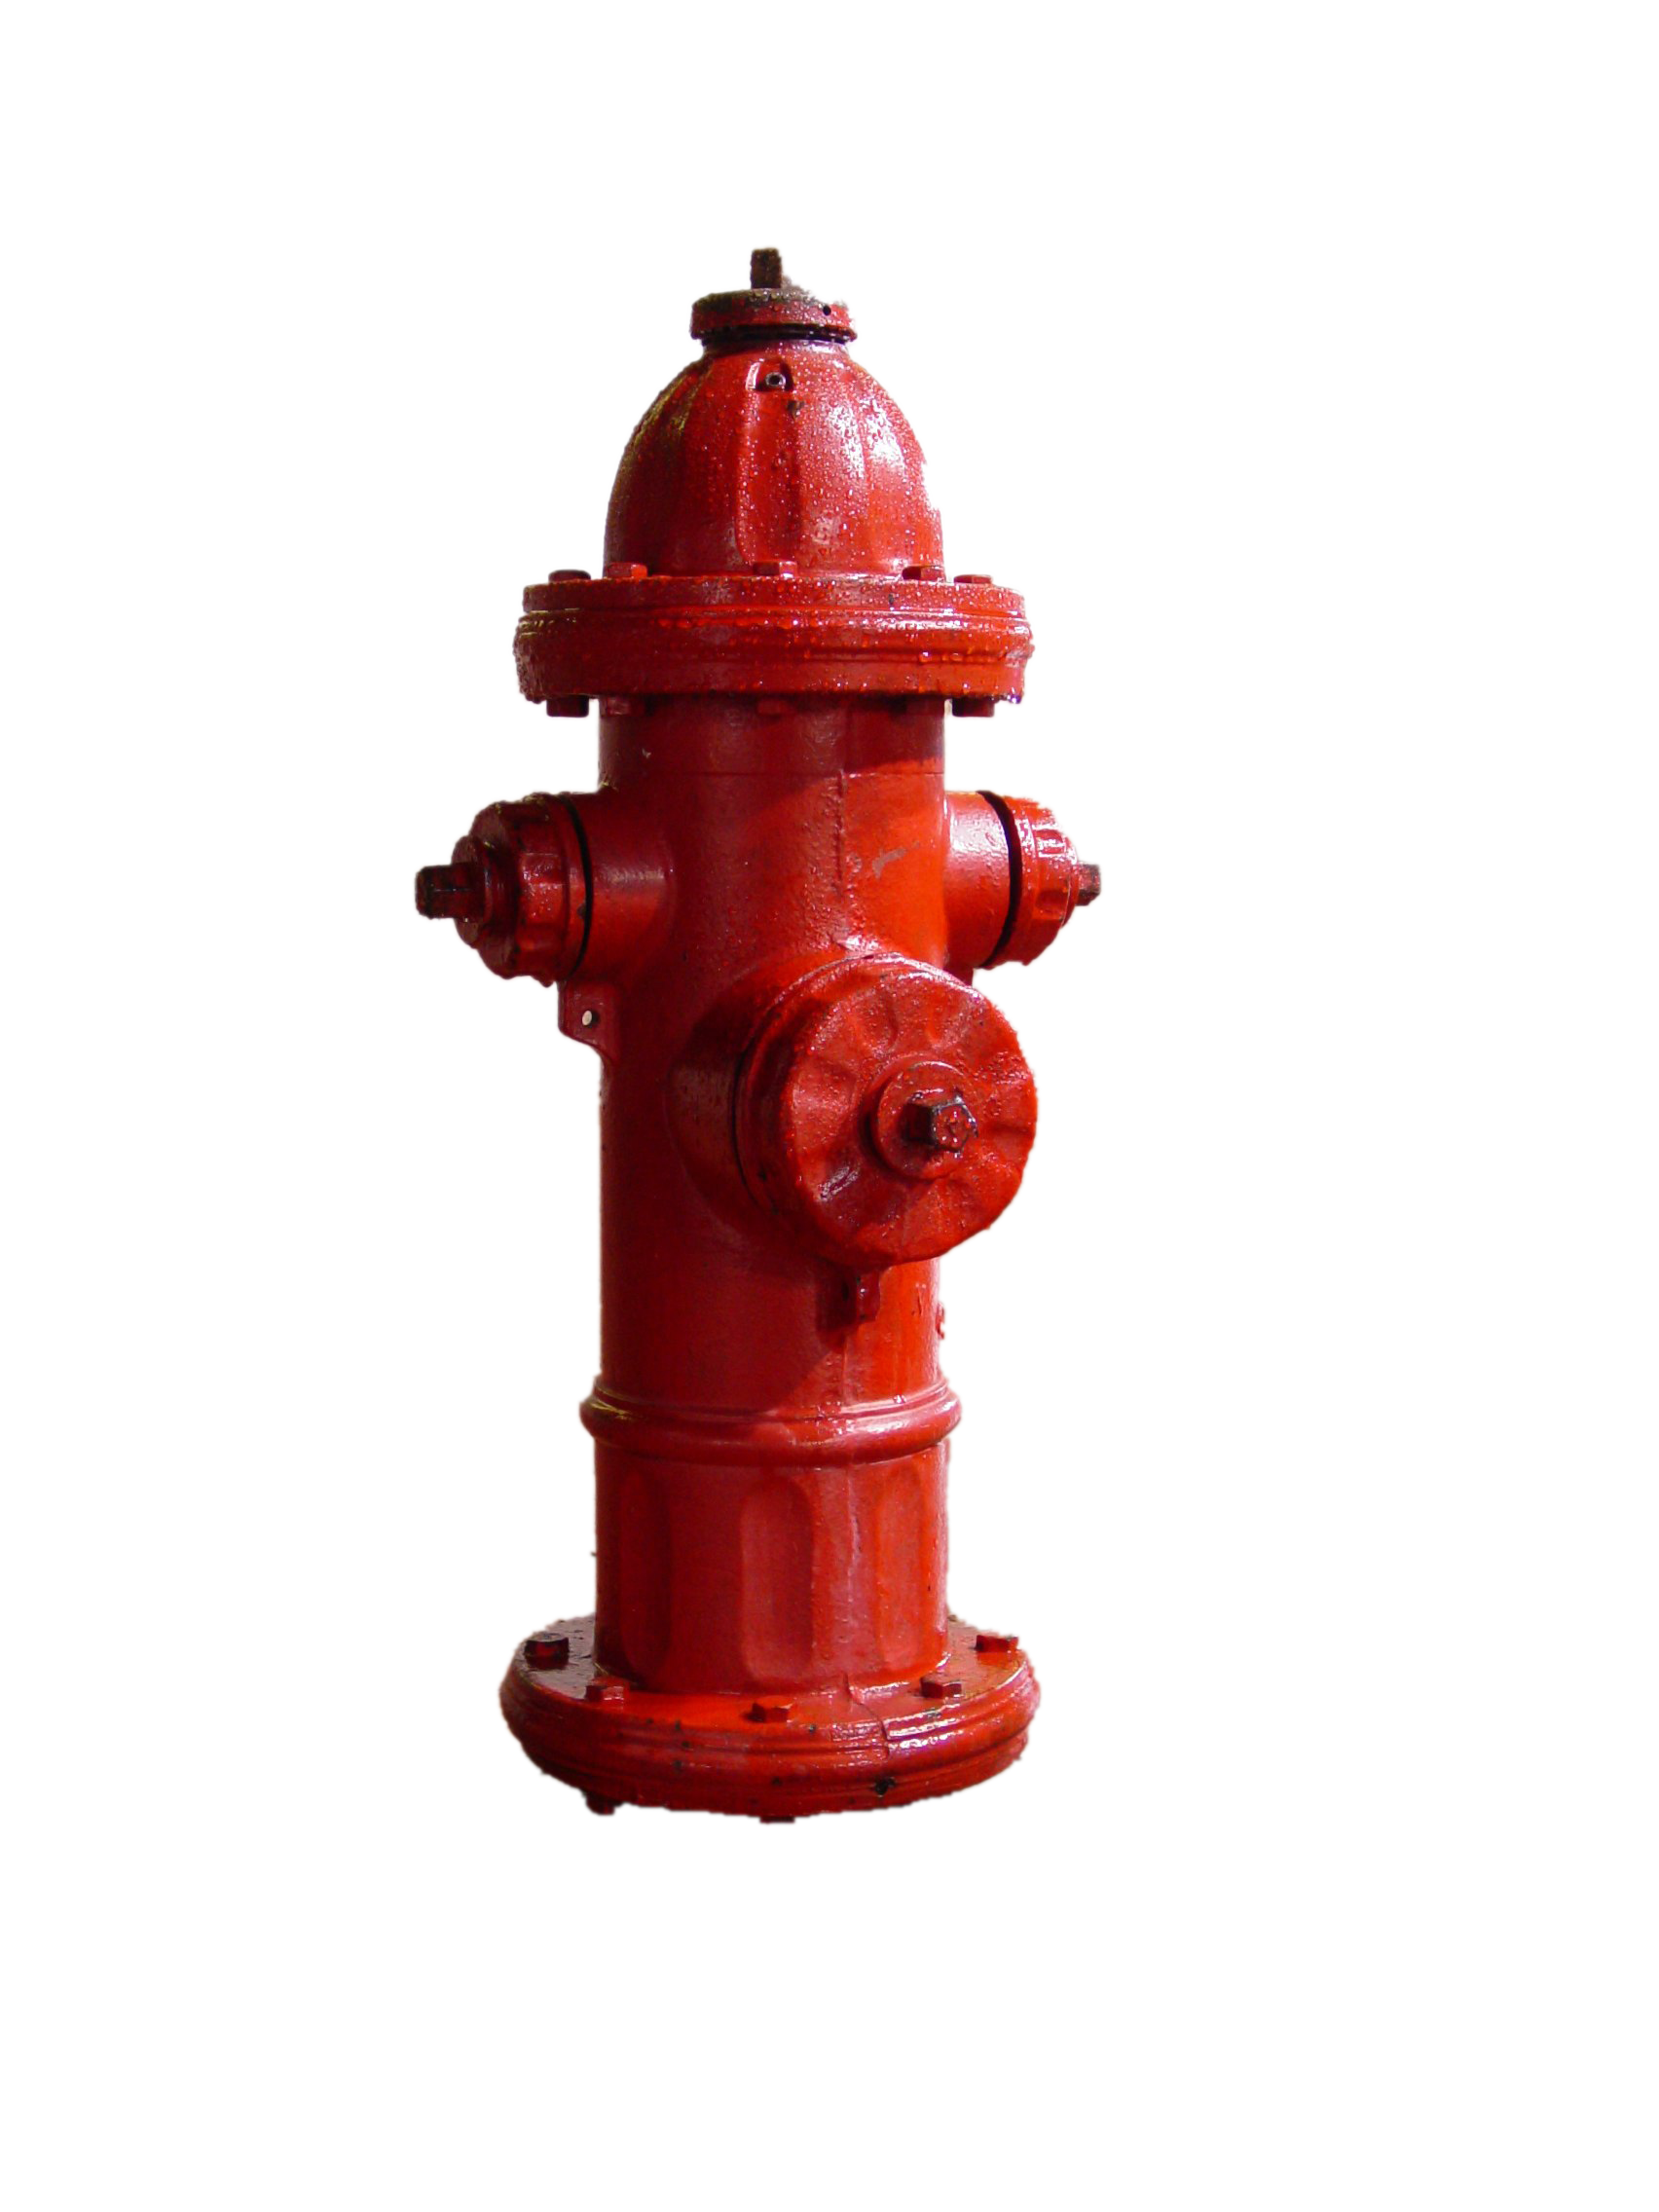 Fire Hydrant Old PNG Image